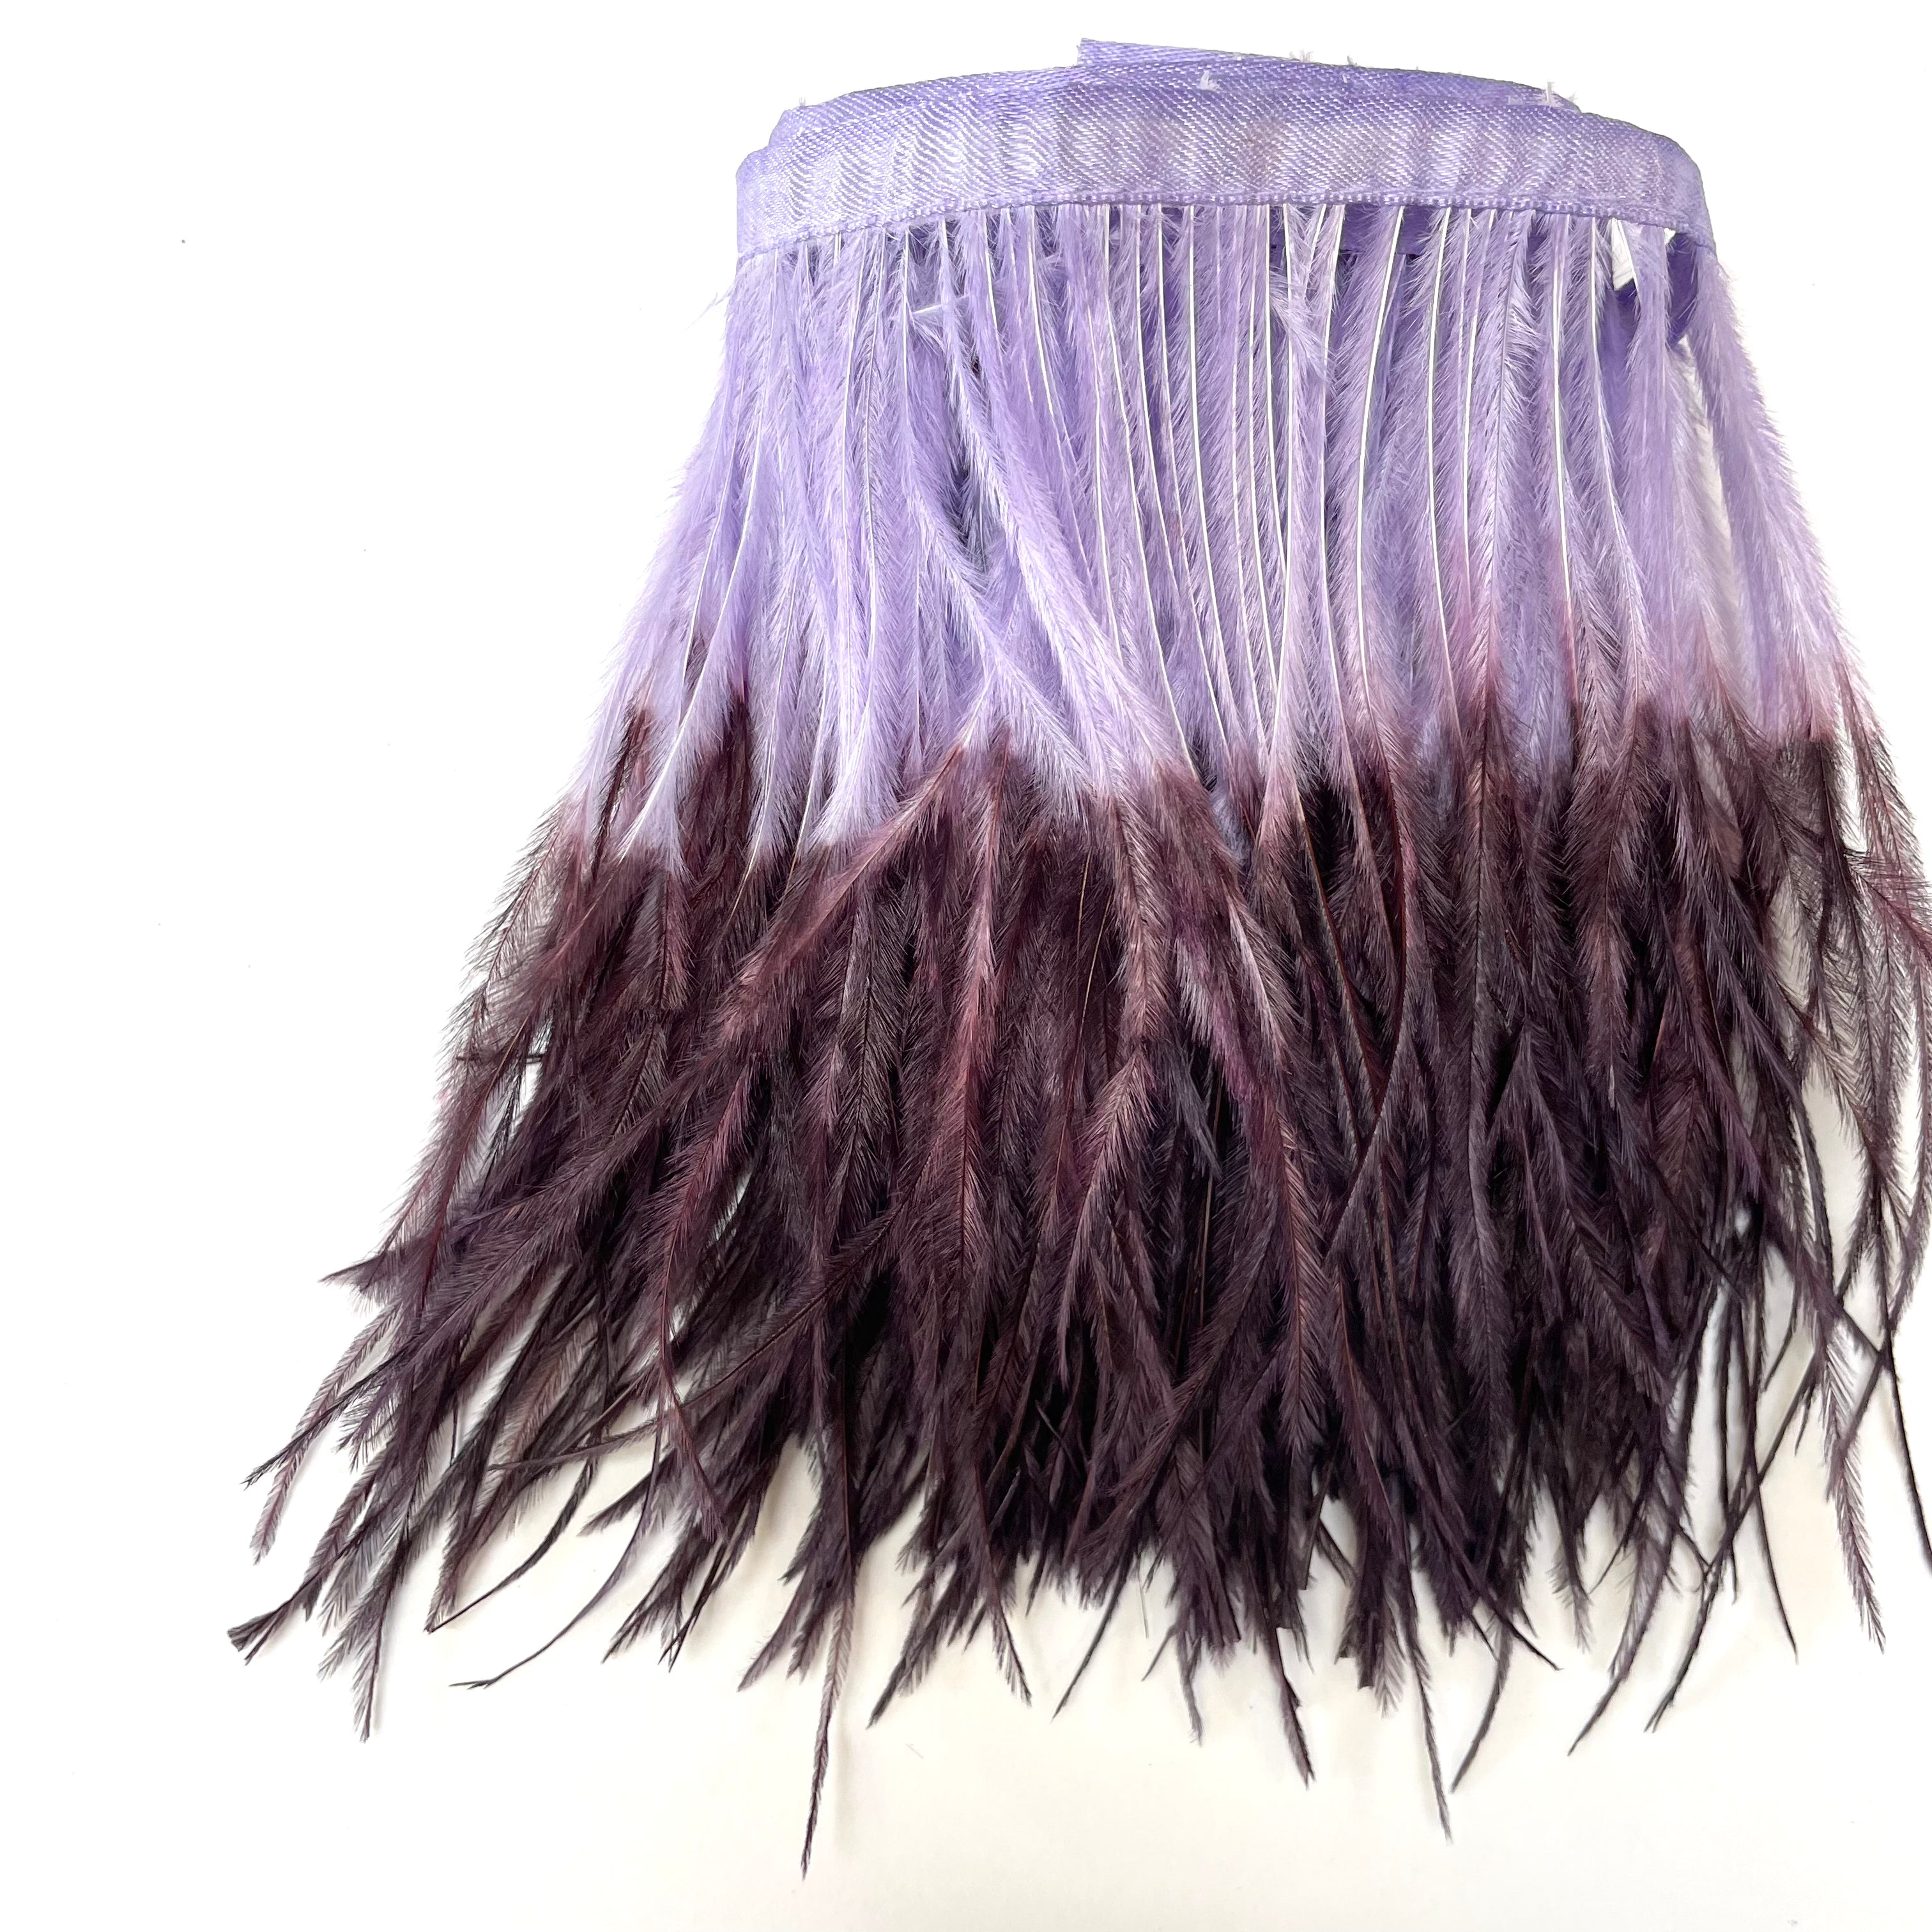 Ostrich Feathers Strung per 10cm - Two Tone Lilac / Eggplant